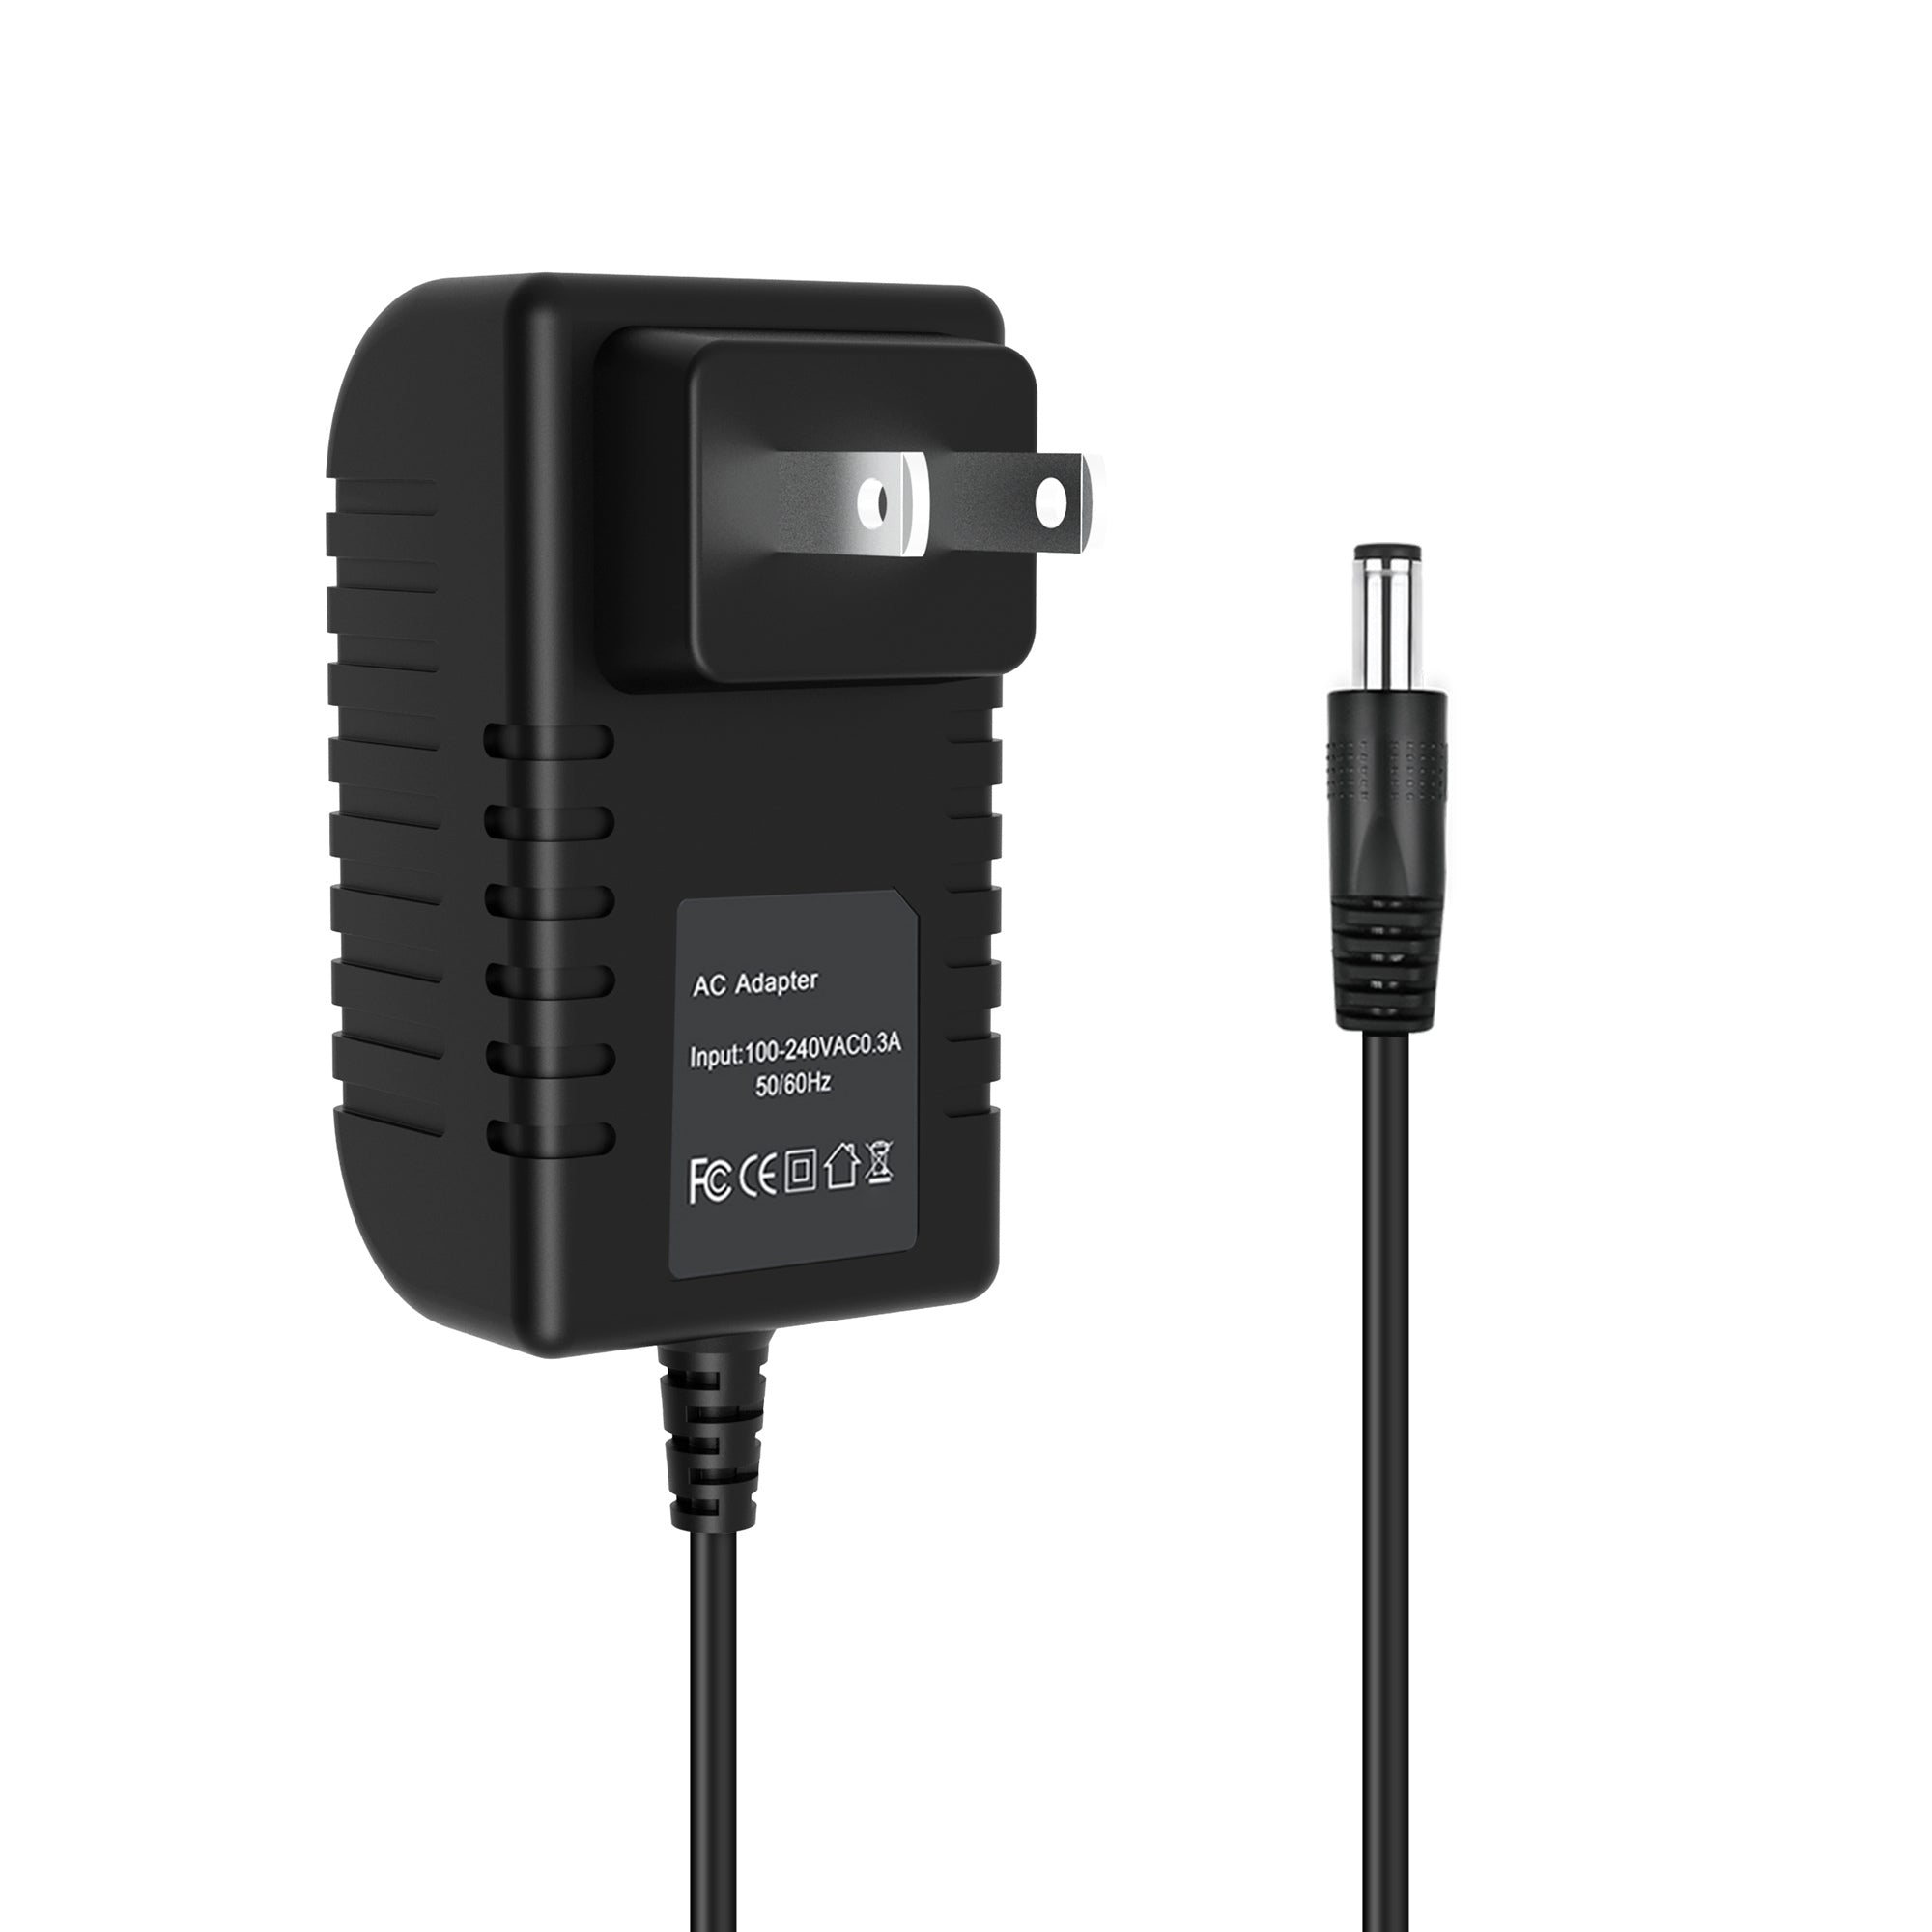 AbleGrid AC Adapter Compatible with MINICOM CAT5 1VS23004 1VS23003 VGA/DATA TRANSMITTER REMOTE Display Broadcaster Extender Charger Power Supply Cord Charger PSU